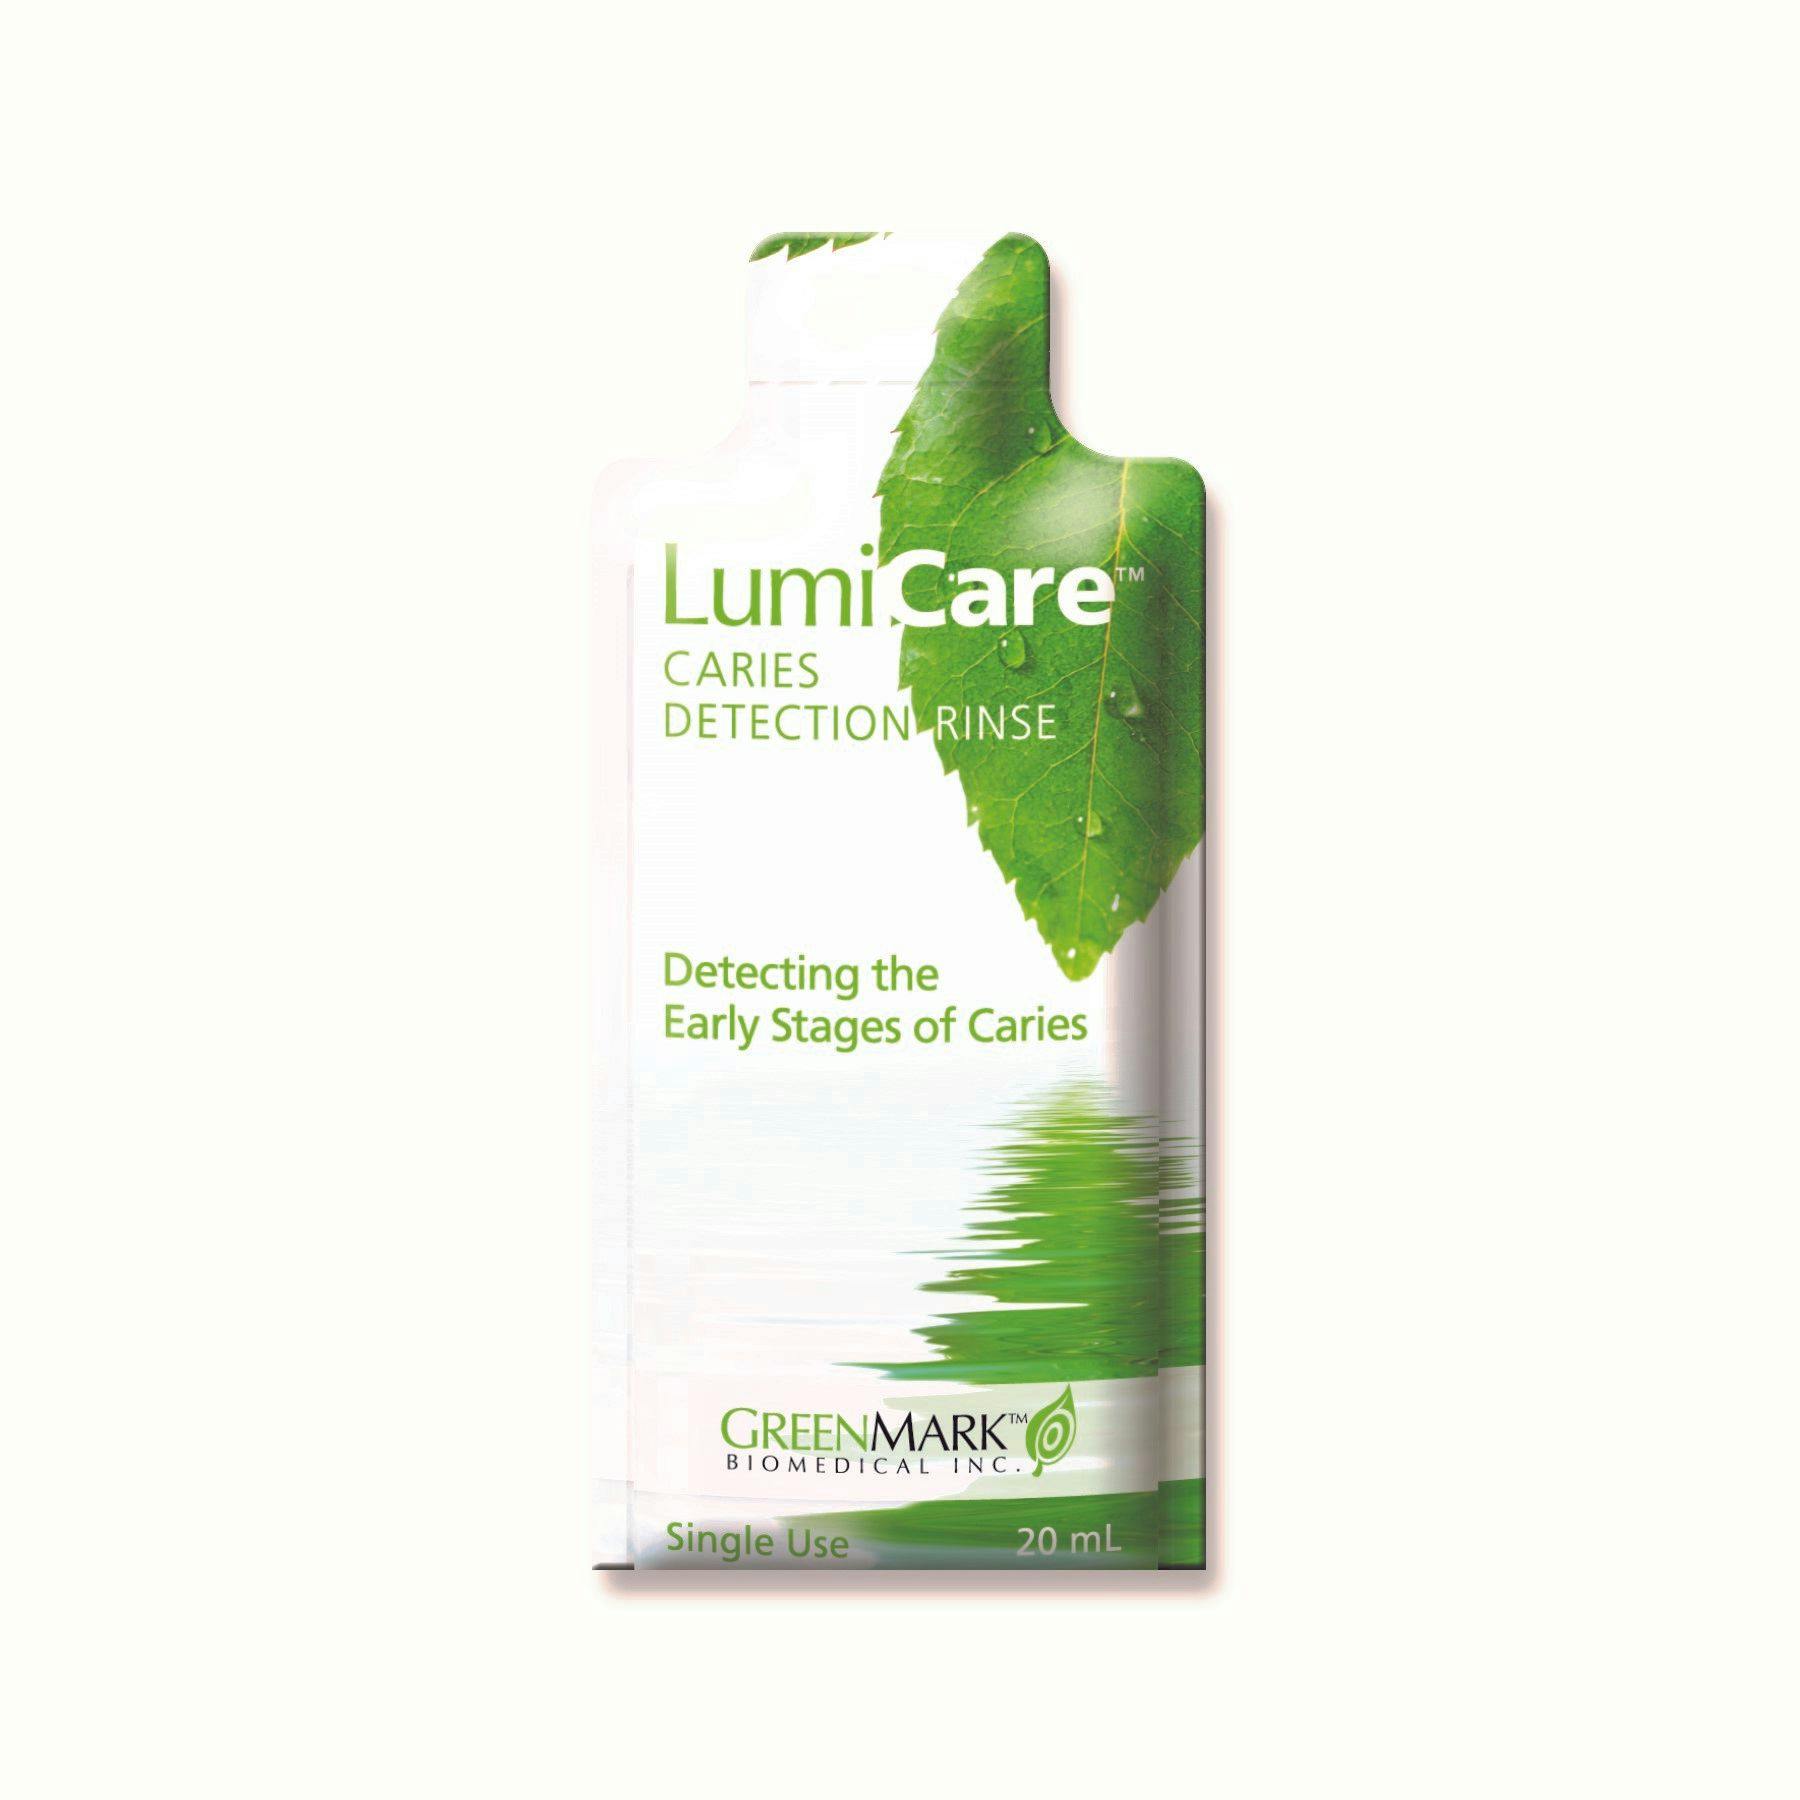 LumiCare caries detection rinse from GreenMark BioMedical